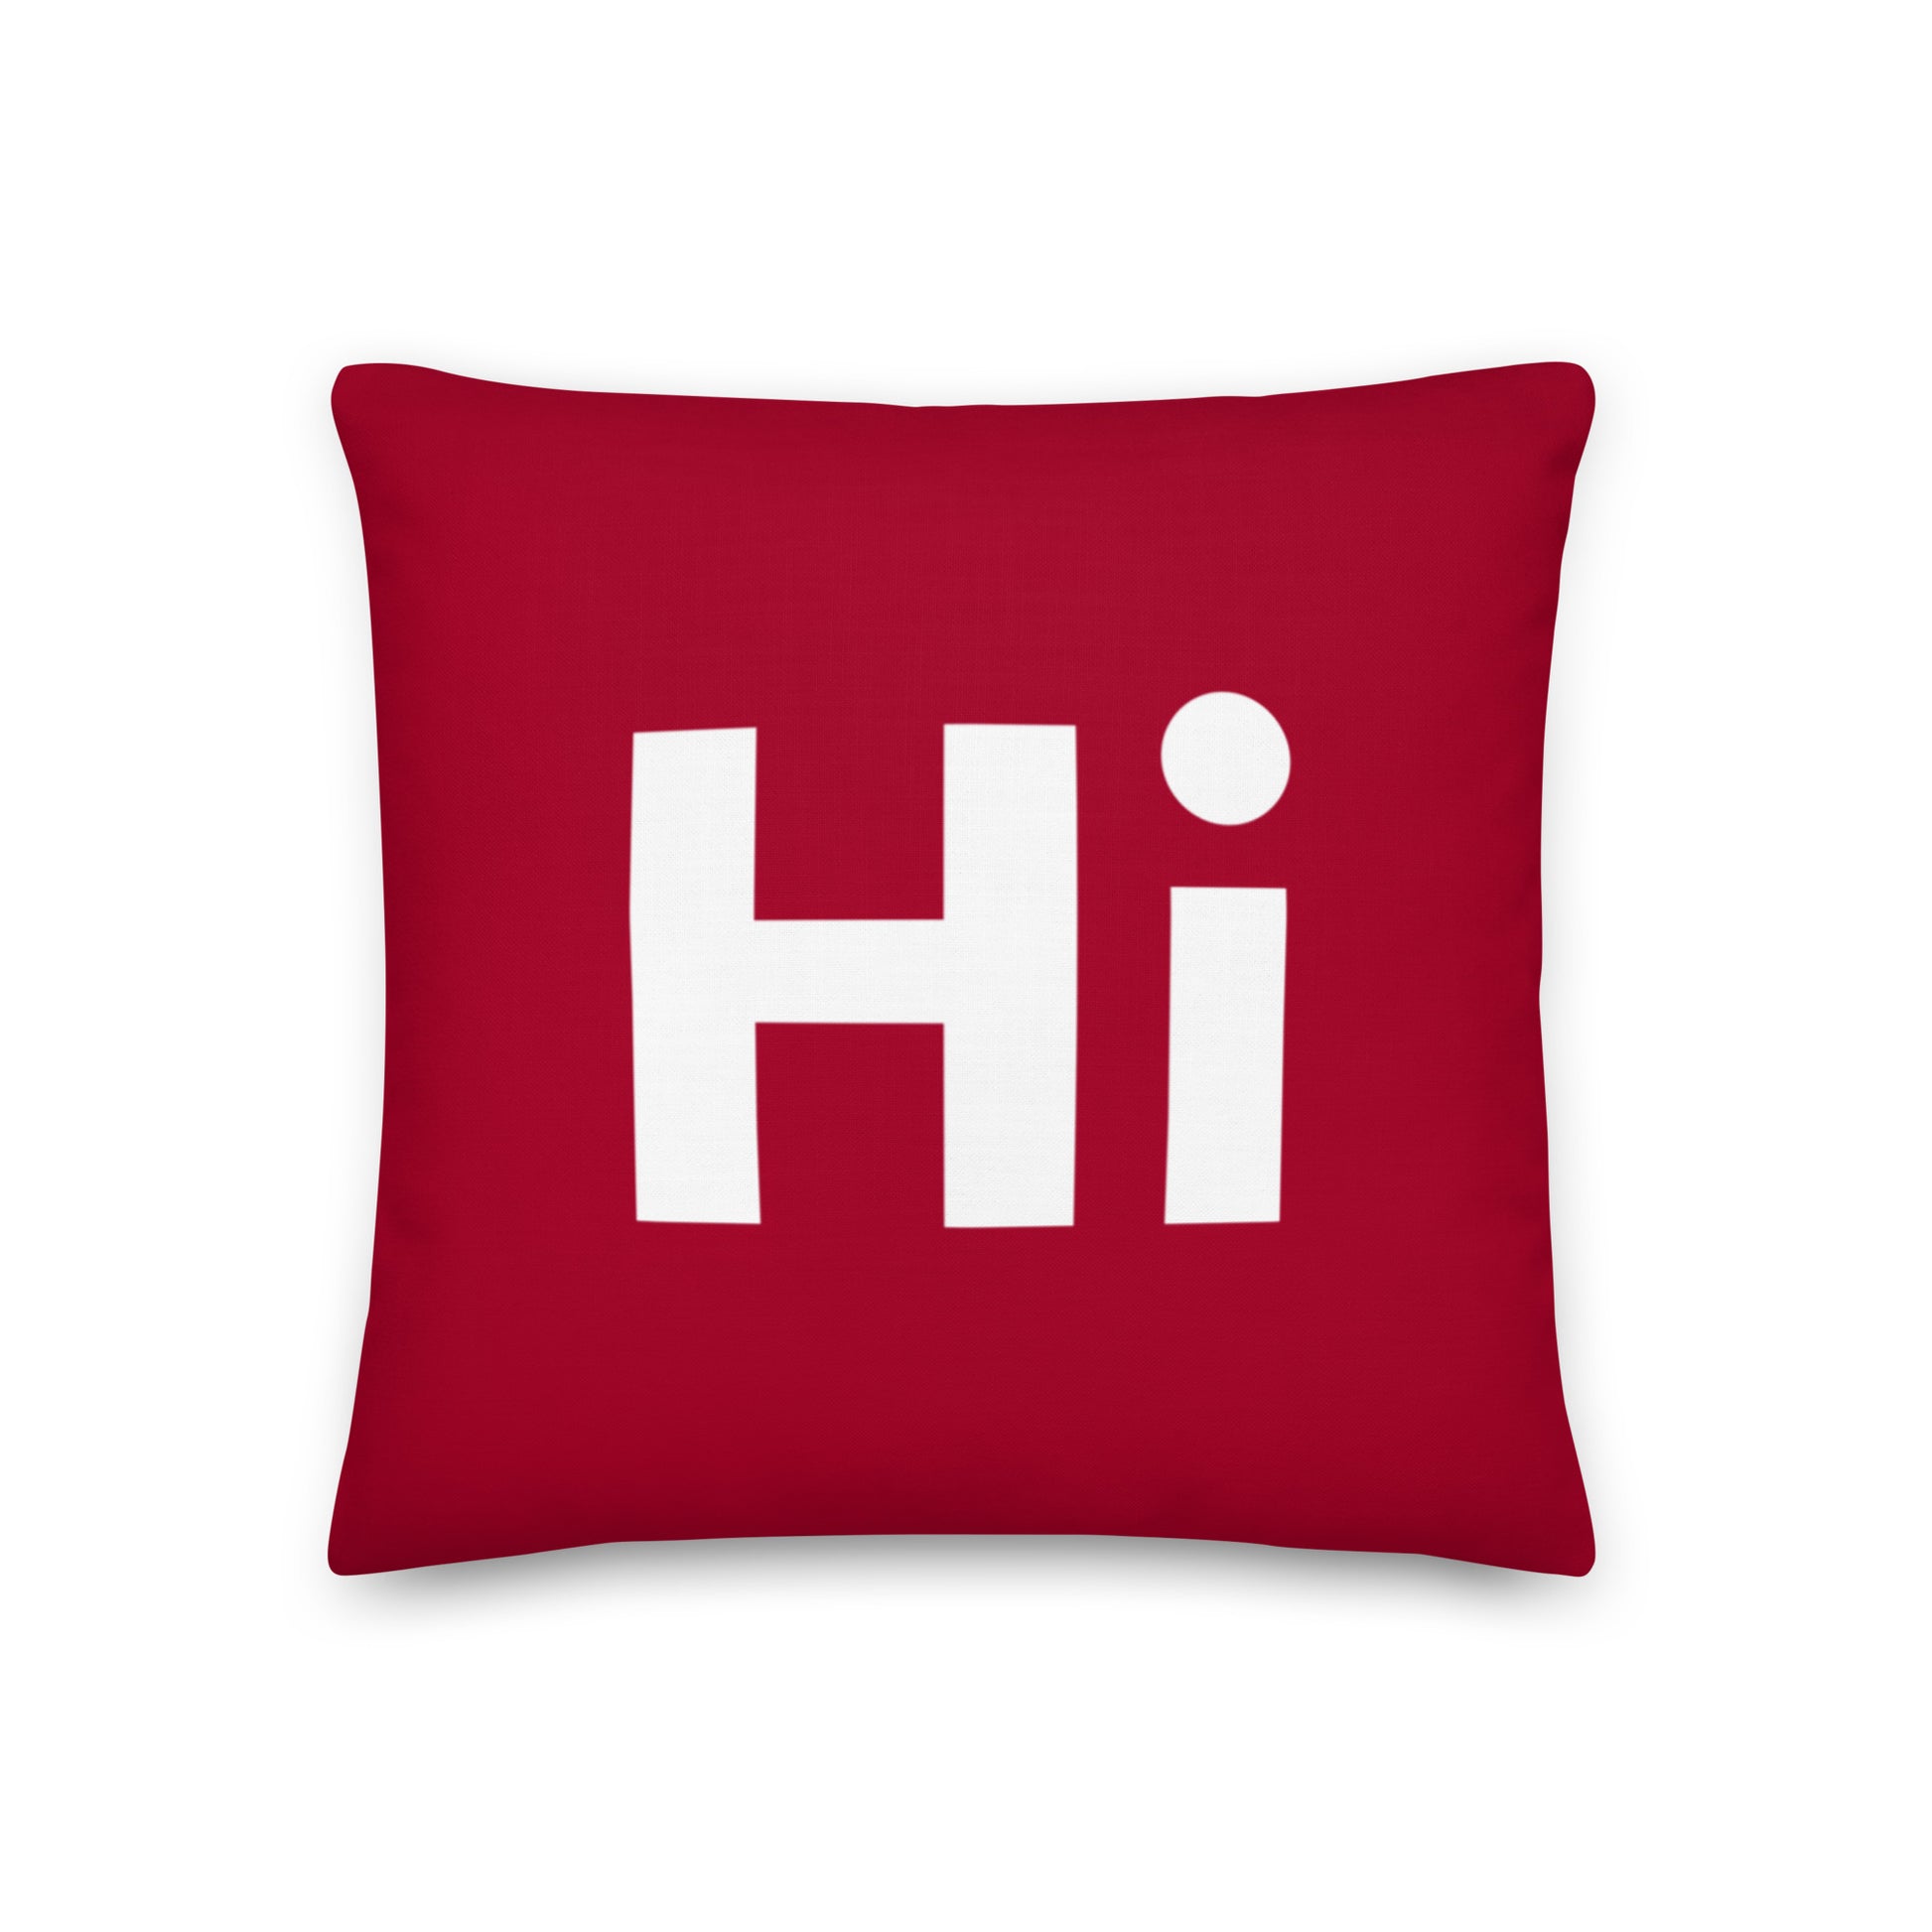 Hi Pillow in red by HiJohnny.com